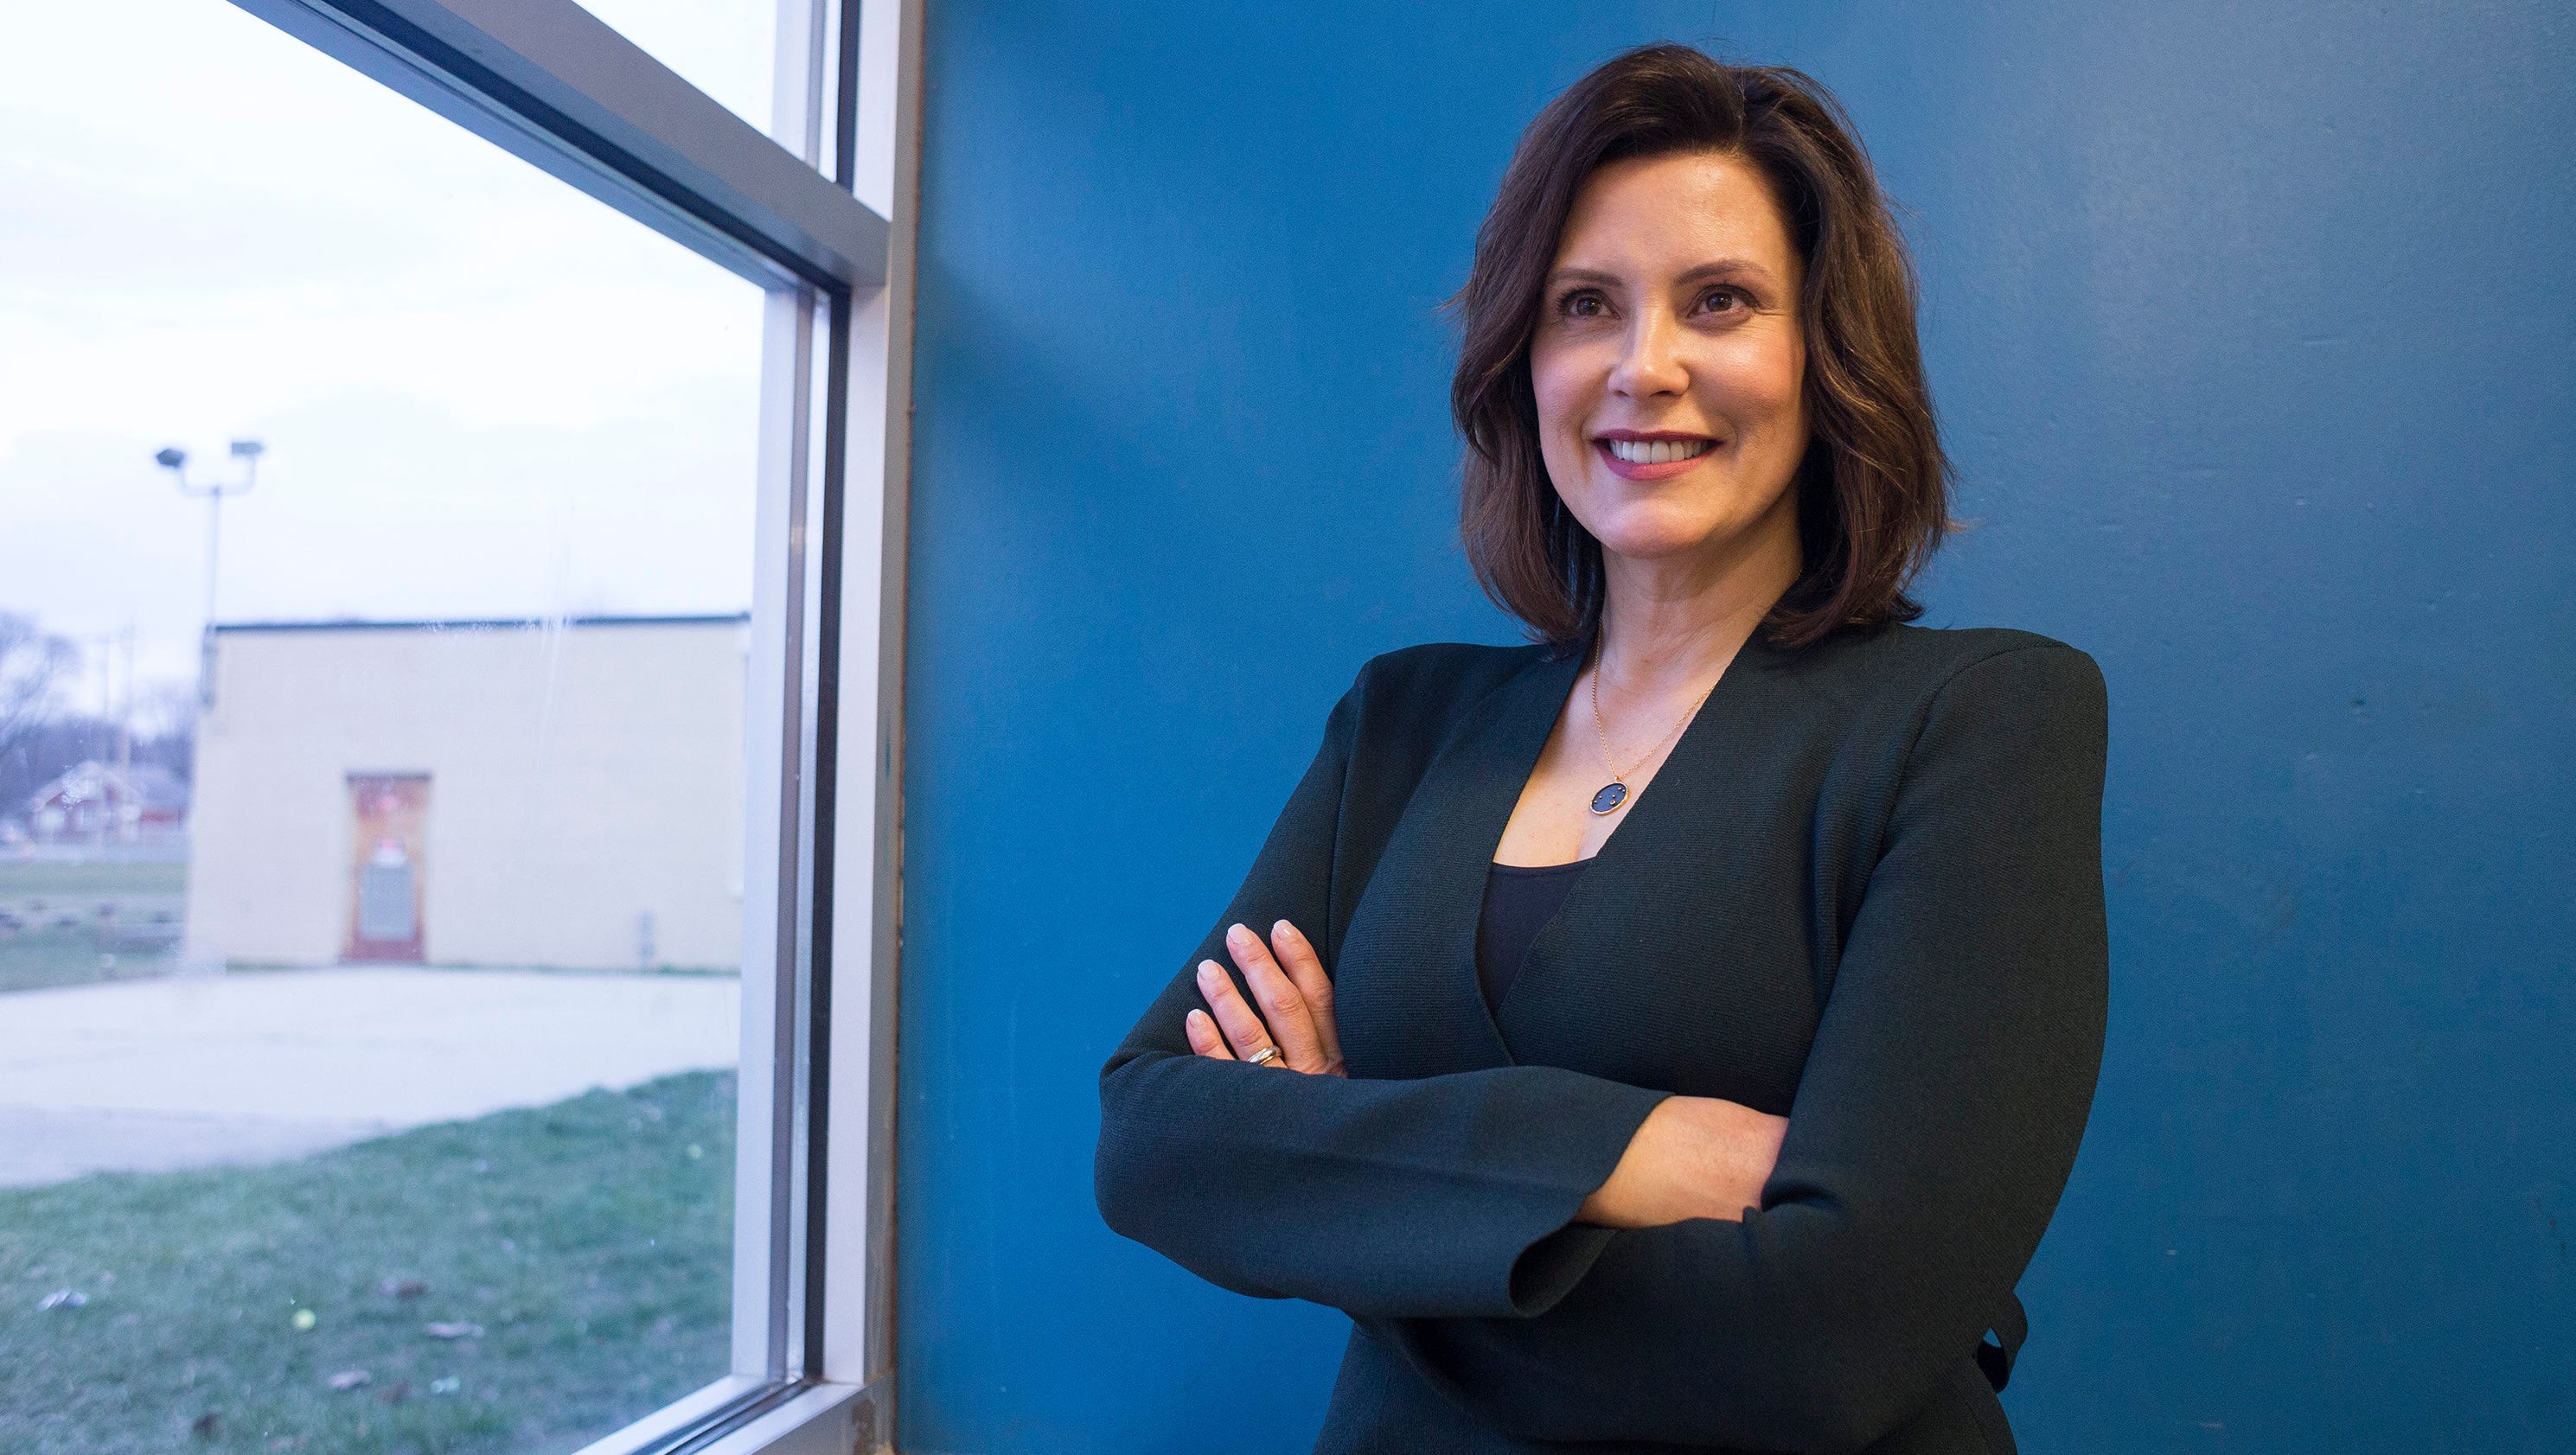 Gretchen Whitmer's biggest problem in Mich. governor race